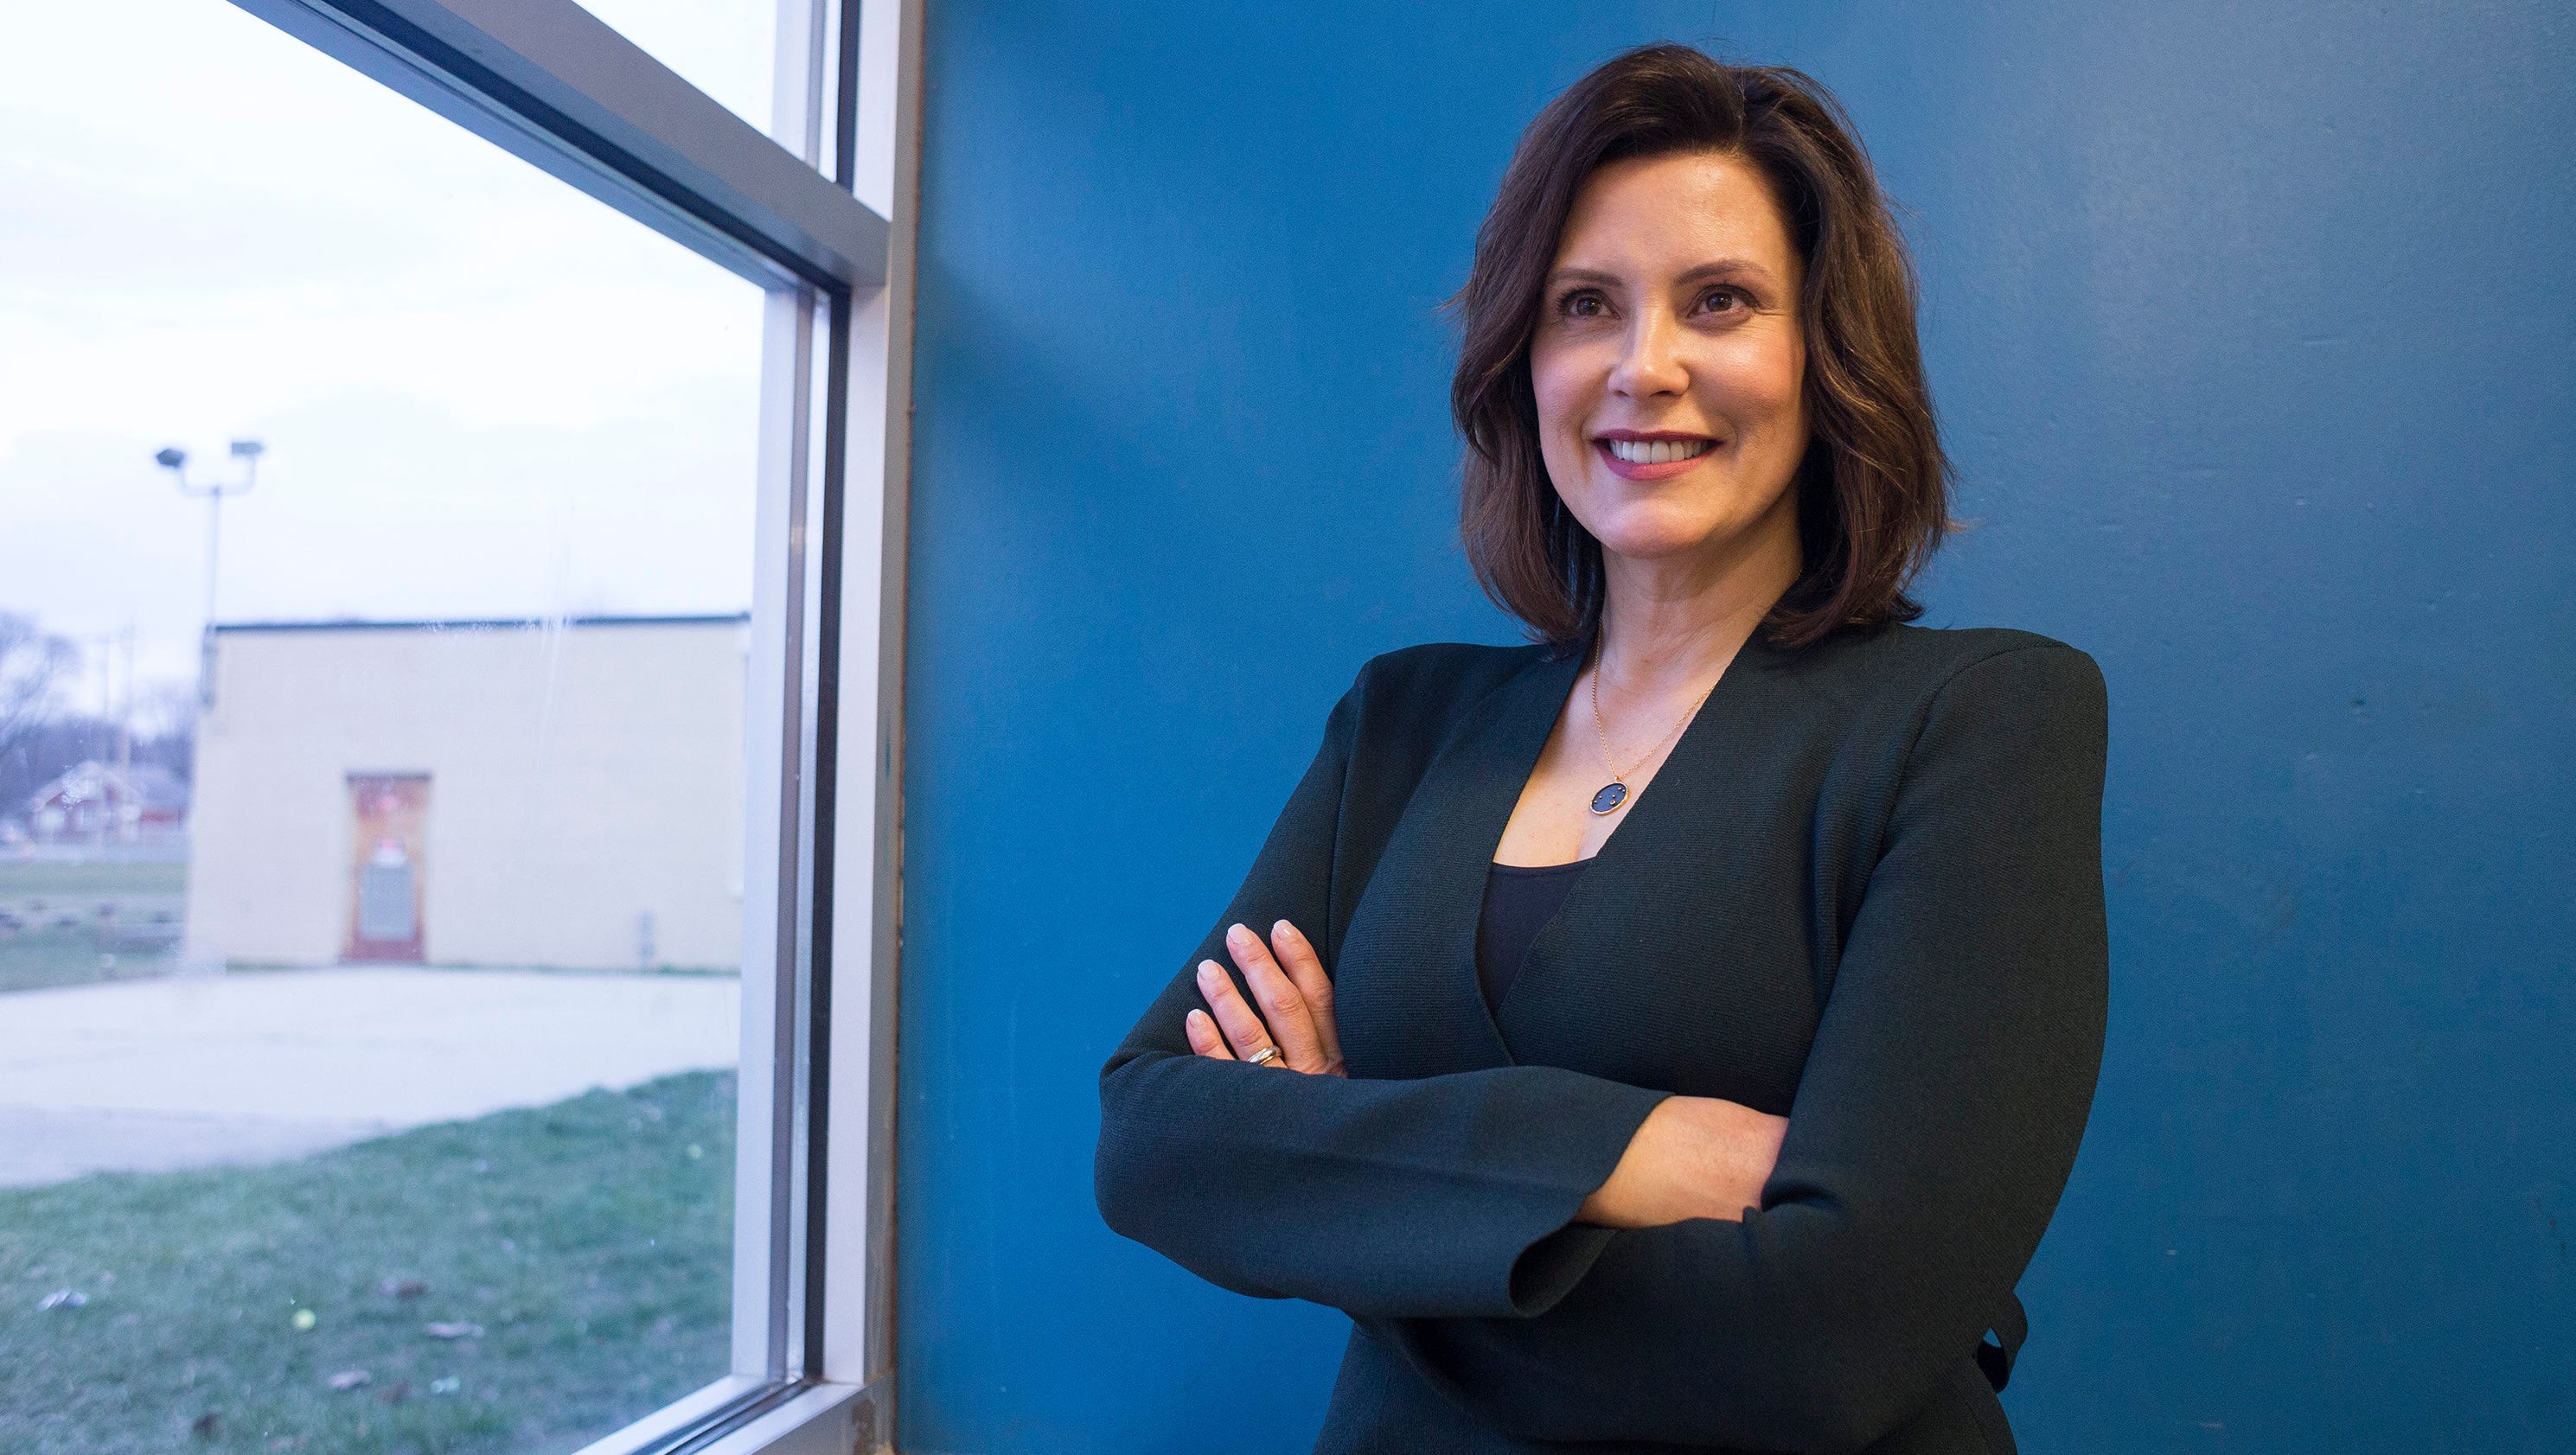 Gretchen Whitmer's biggest problem in Mich. governor race